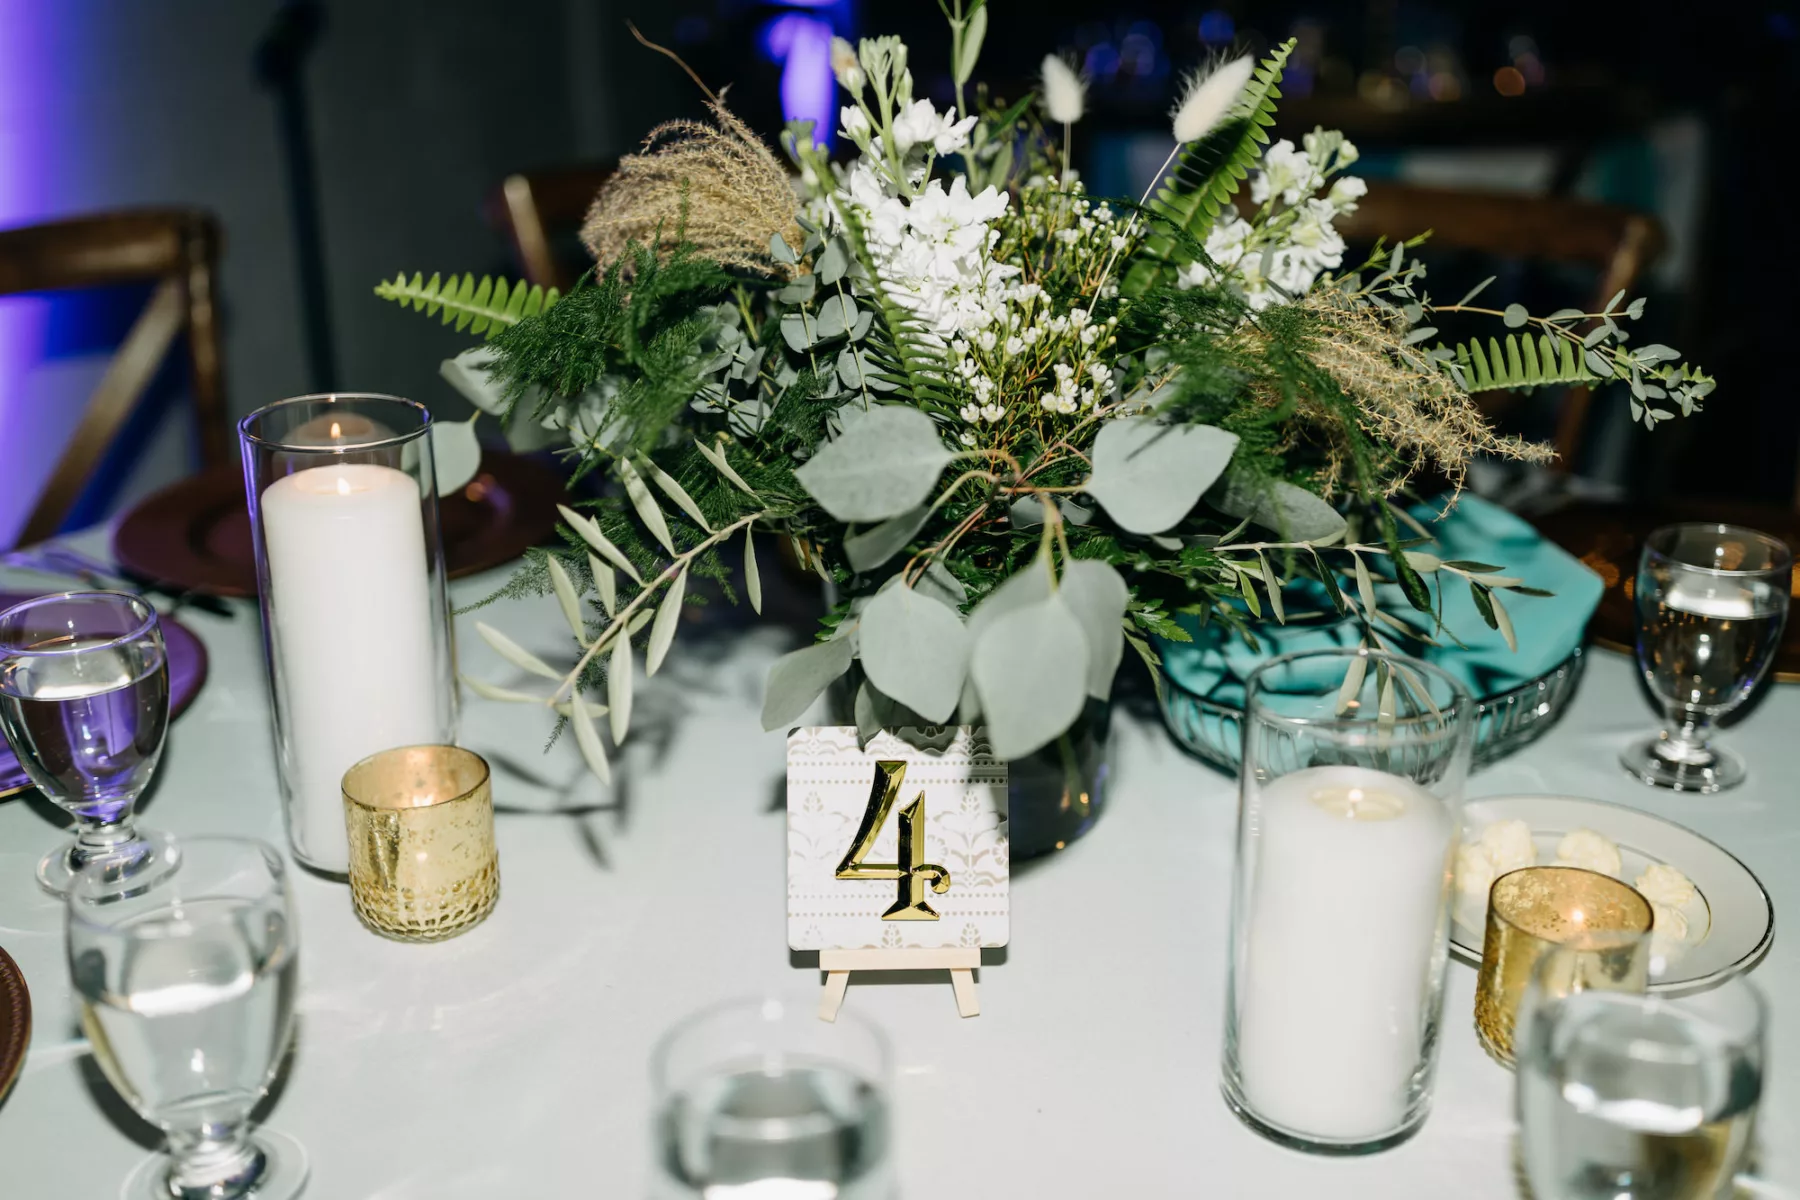 Boho Wedding Reception Centerpiece Ideas | Candles, Gold Votives, and Table Numbers | White Flowers, Fern, and Greenery Floral Arrangement Inspiration